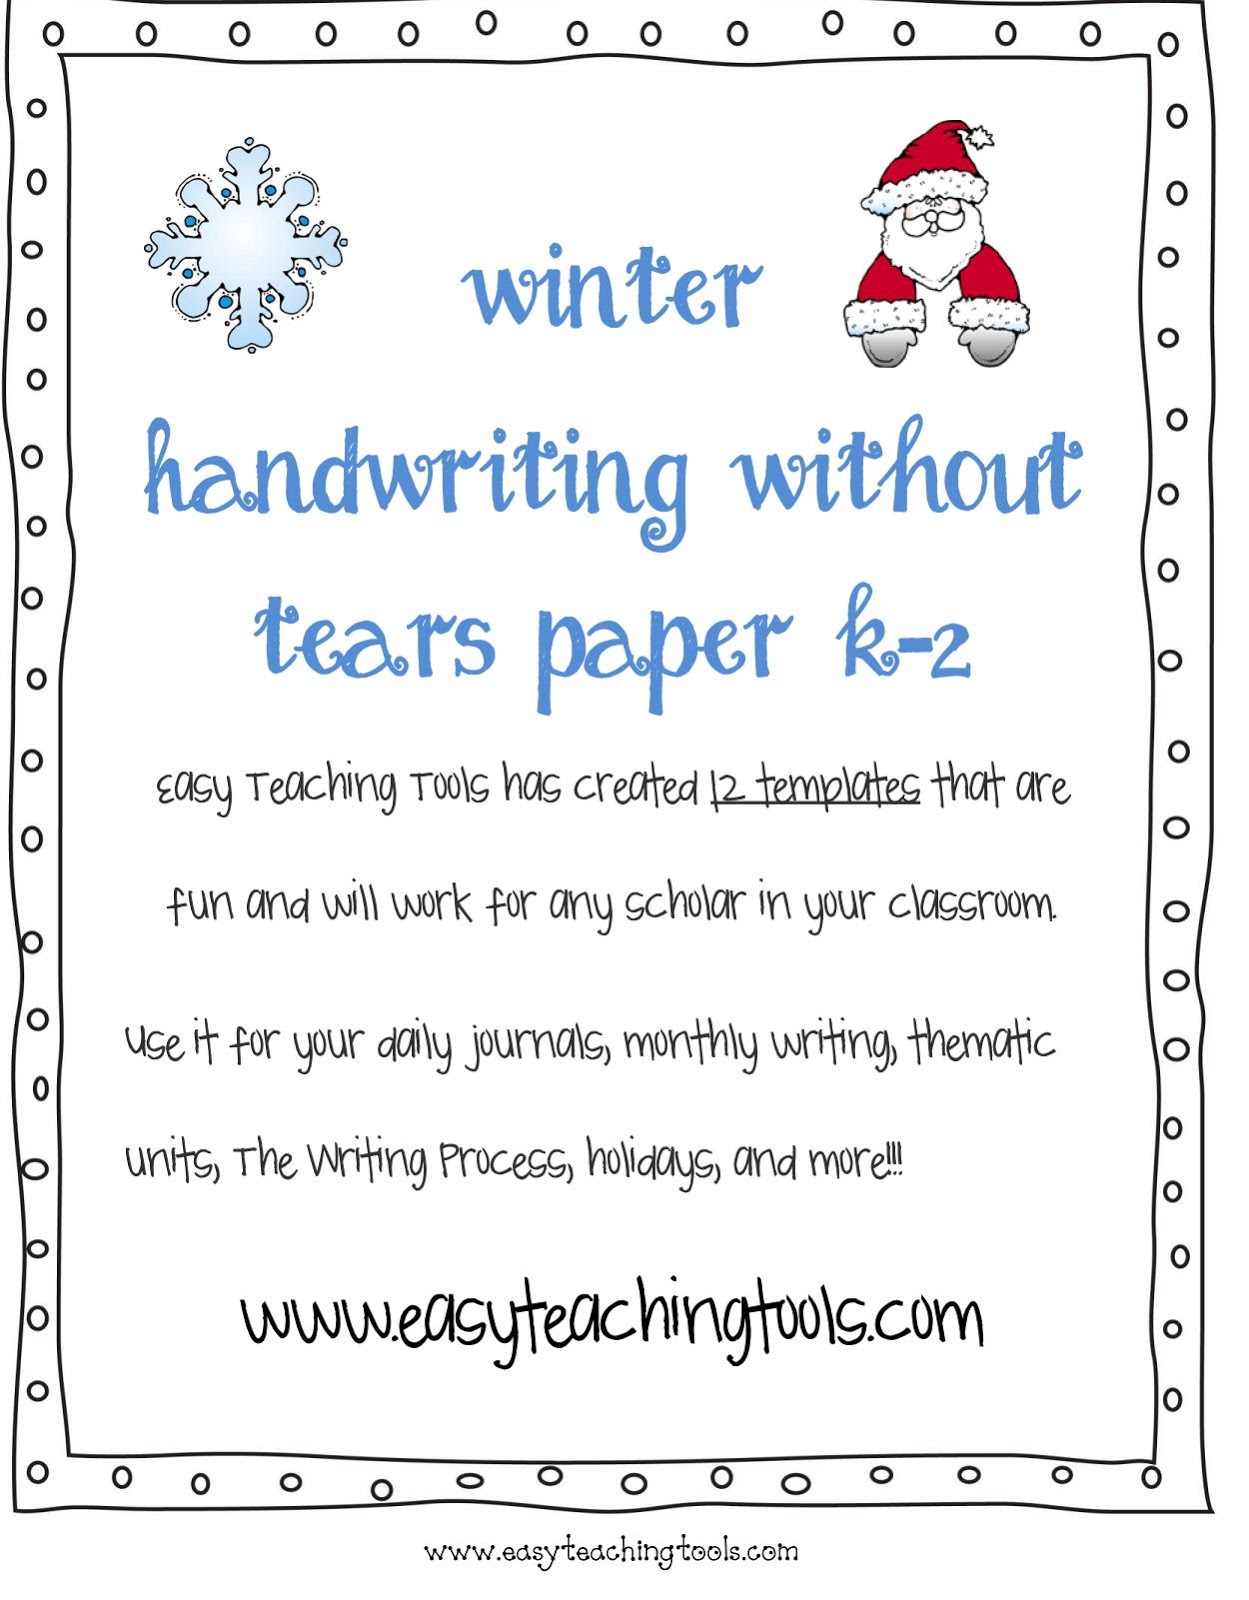 Handwriting without tears paper template